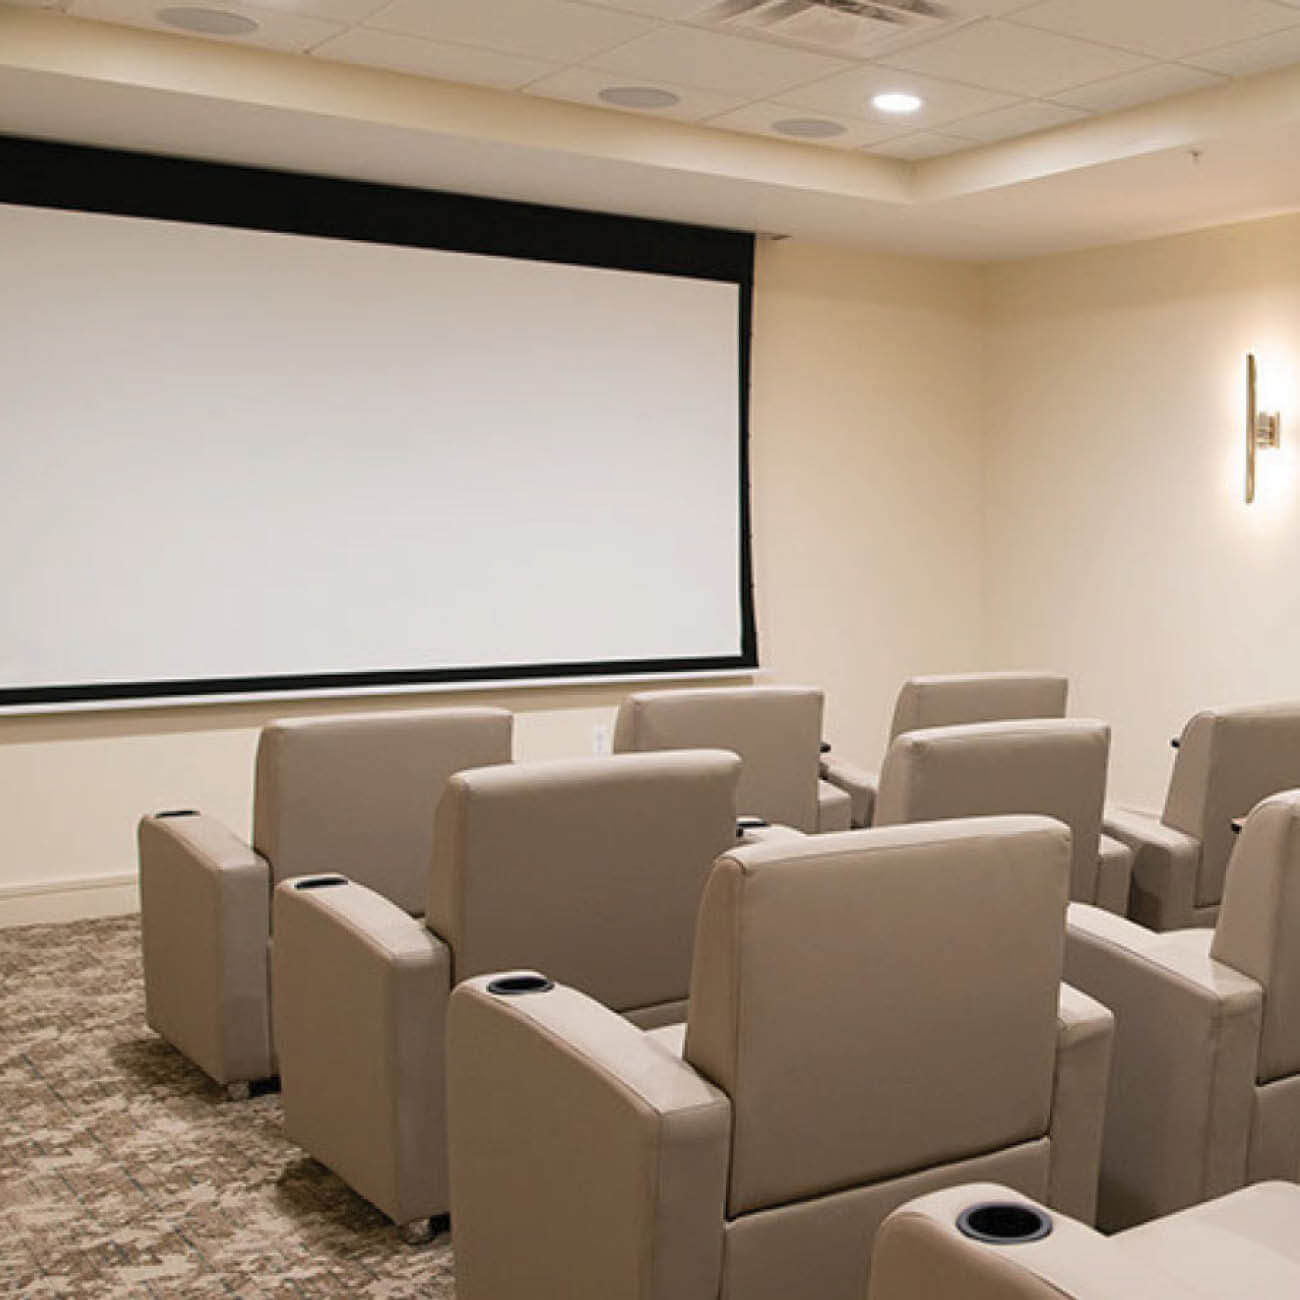 Theatre room at Highpoint at Cape Coral. Includes many reclining leather movie theatre seats and a large projector screen.